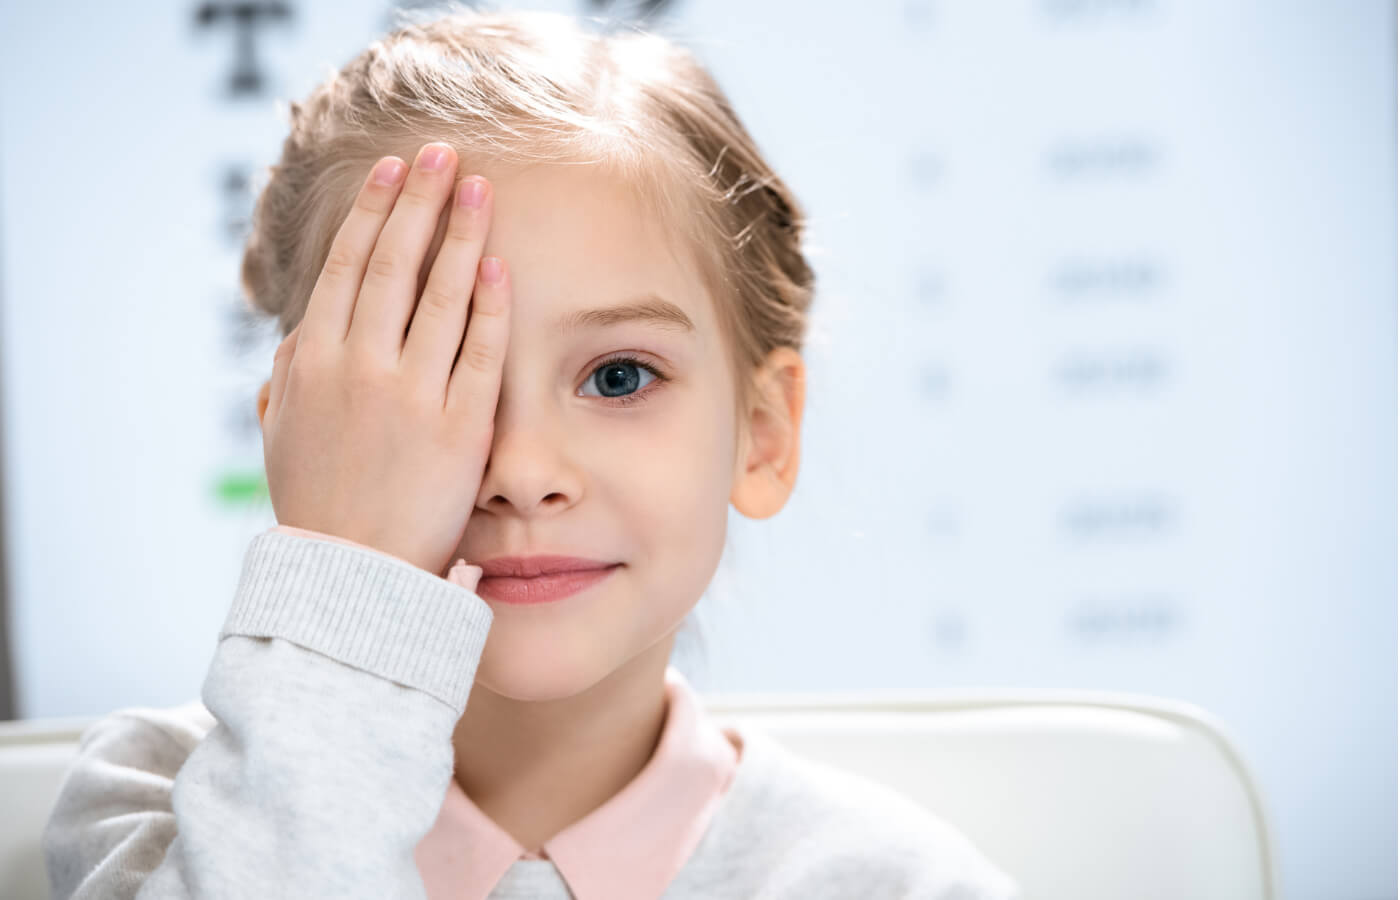 Young girl covering her right eye with her right hand.